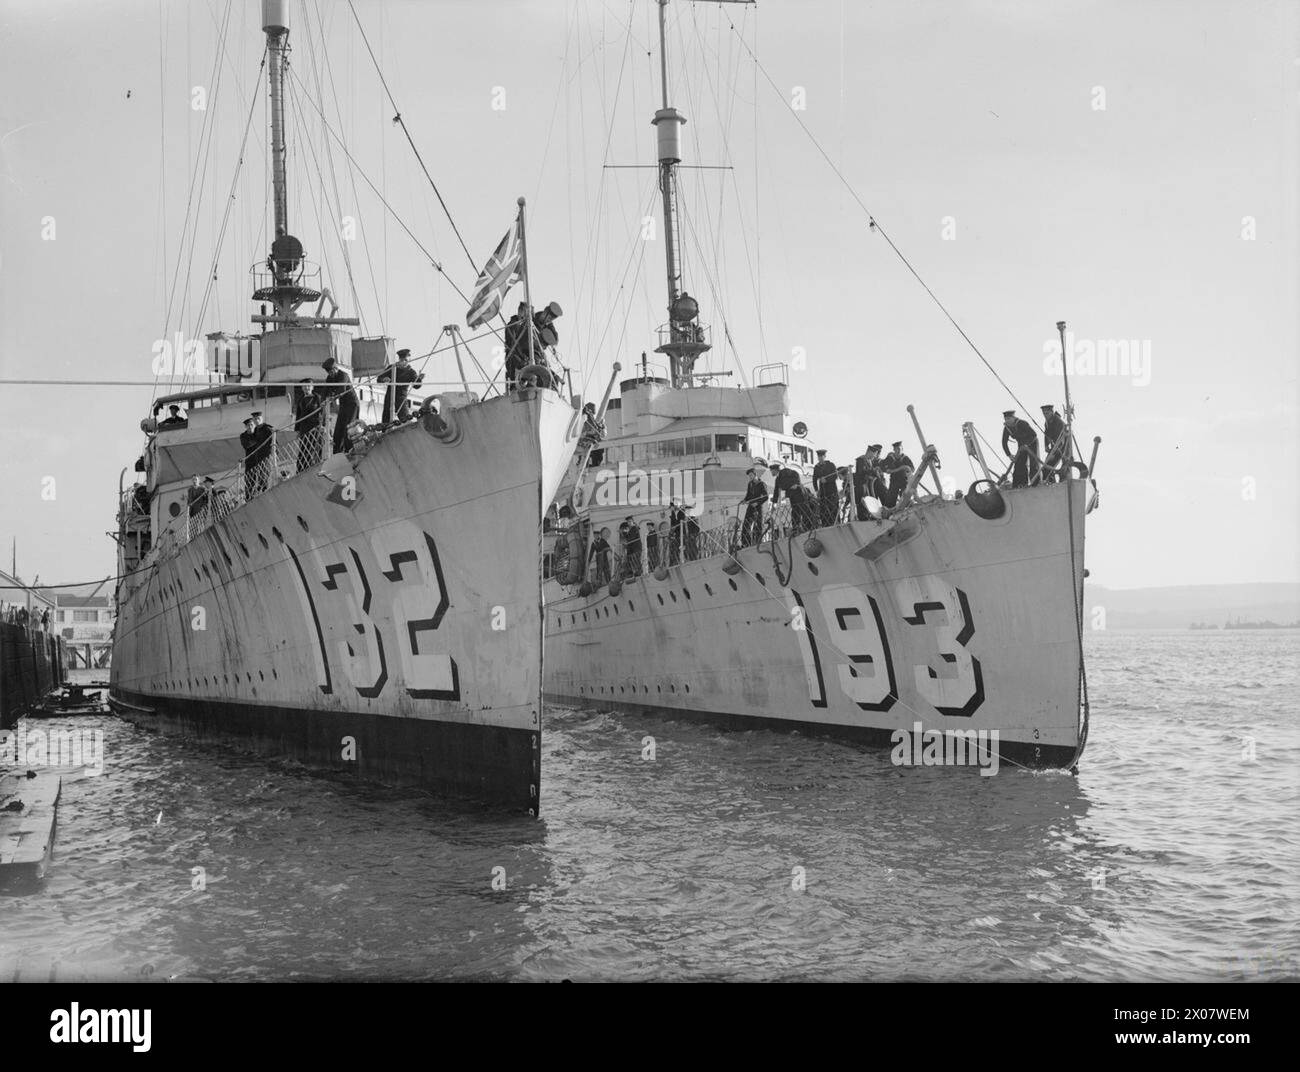 ARRIVAL OF THE FIRST FLOTILLA OF AMERICAN DESTROYERS FOR ROYAL NAVY. 28 SEPTEMBER 1940, ROYAL DOCKYARD, DEVONPORT. THE FLOTILLA, HANDED OVER BY THE US GOVERNMENT UNDER THE AGREEMENT, WERE MANNED ENTIRELY BY BRITISH CREWS. - The flotilla leader HMS CASTLETON (ex-USS AARON WARD) along with another of the destroyers moored alongside  HMS Castleton (Ex-USS Aaron Ward) Stock Photo